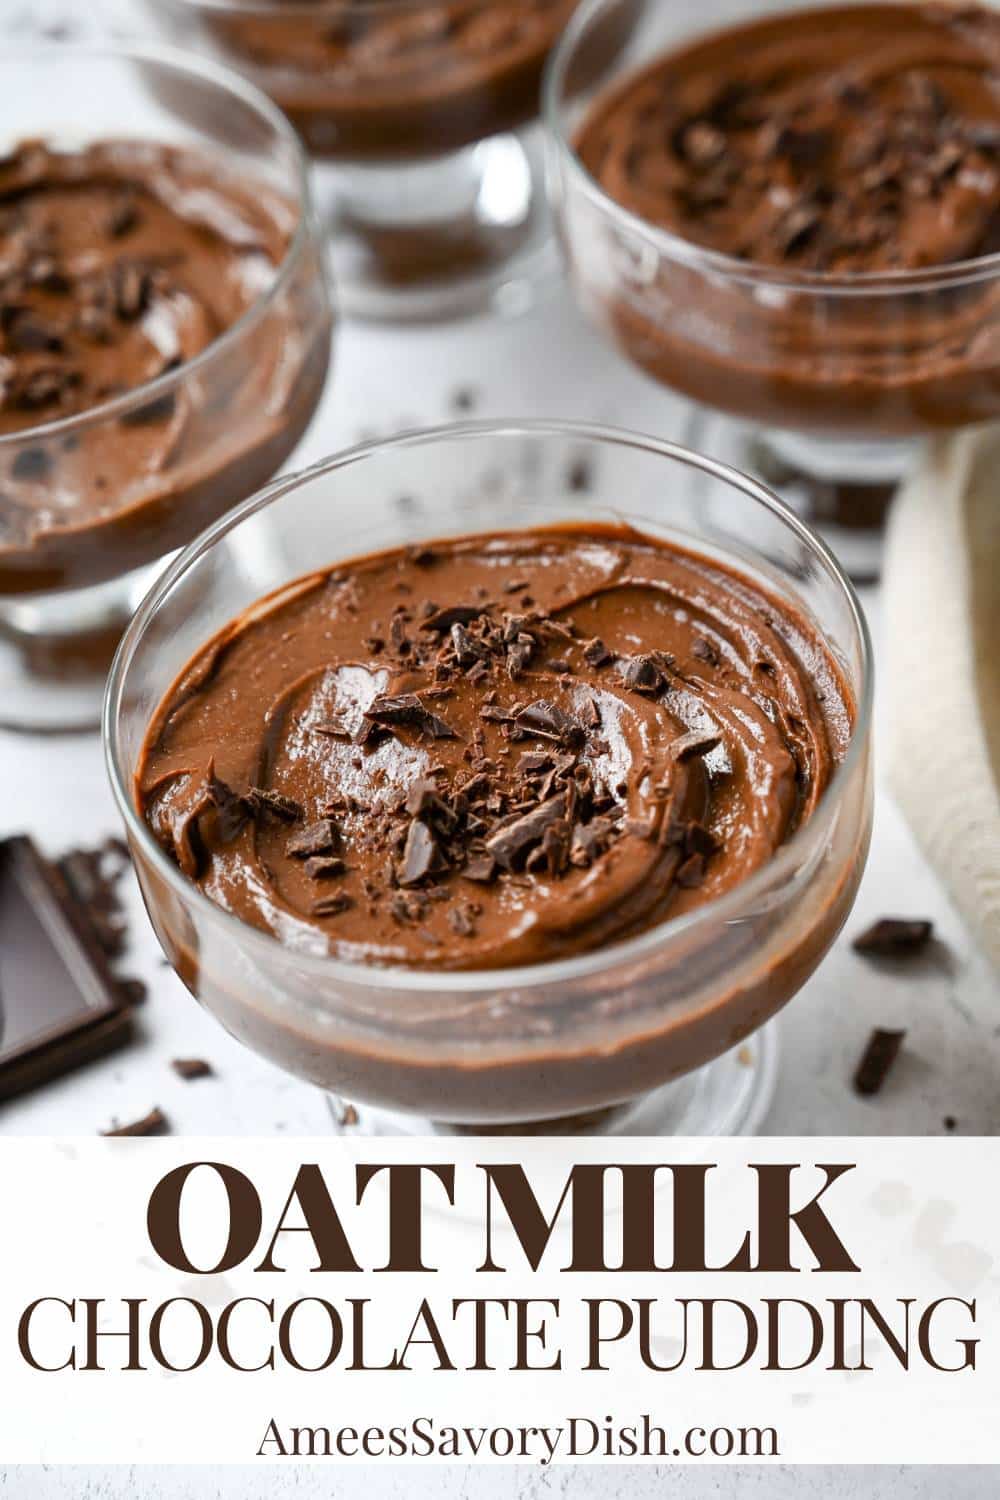 A divine recipe for homemade chocolate pudding made with oat milk, dark chocolate, and real maple syrup that's even better than the original. via @Ameessavorydish